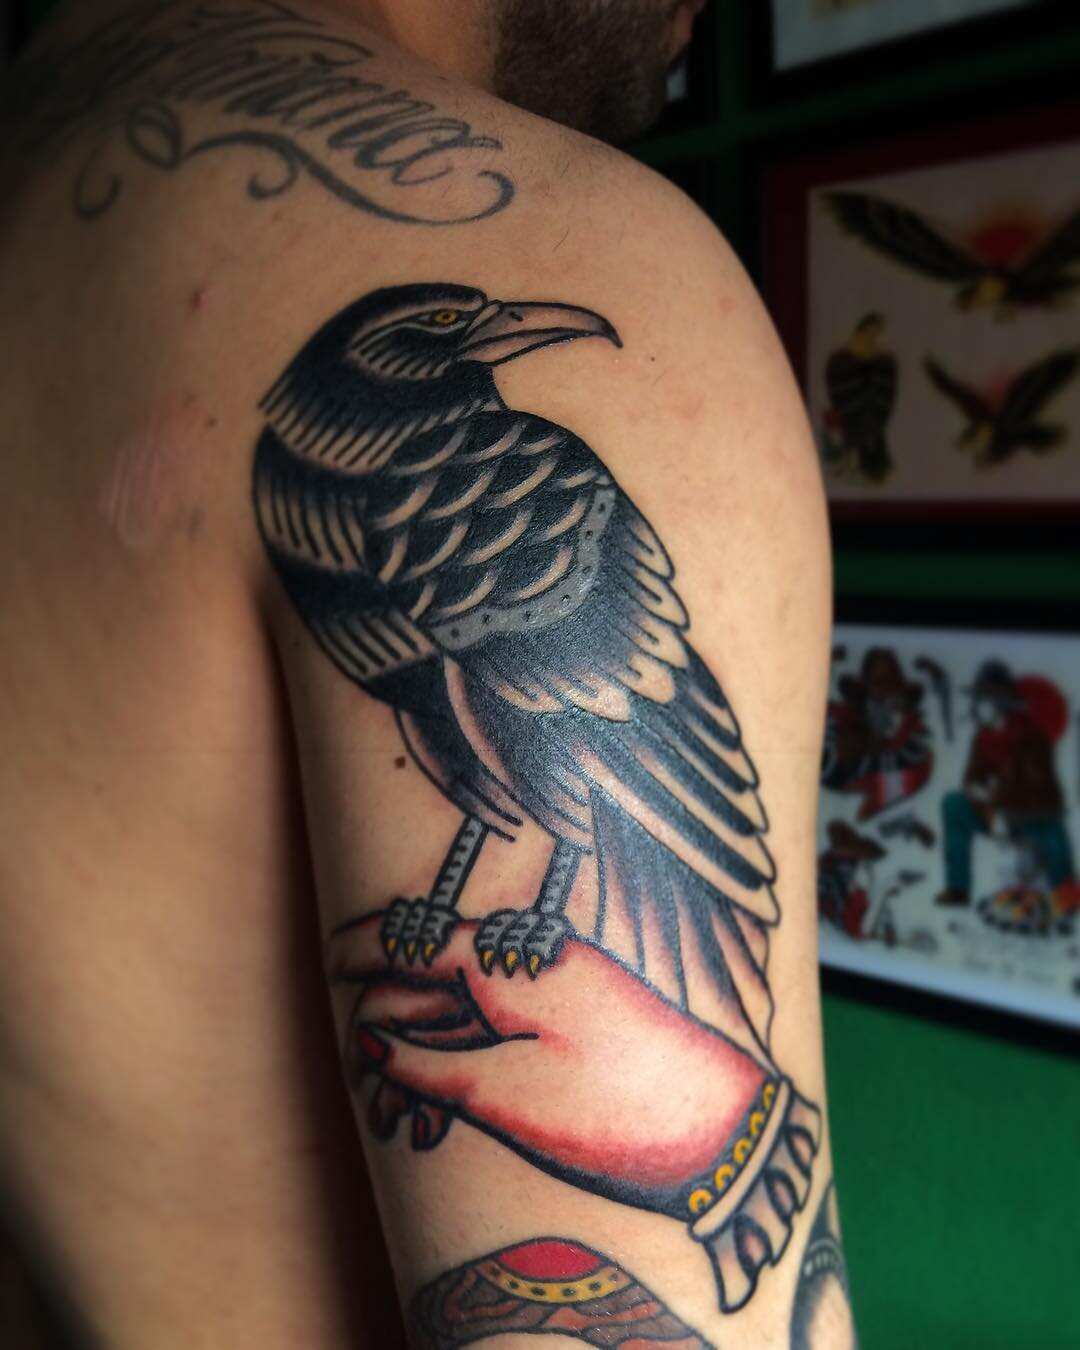 Twoheaded Raven  Filler to finish off the sleeve All done by NhatBe  Alchemist Tattoo Saigon Vietnam  rtattoos